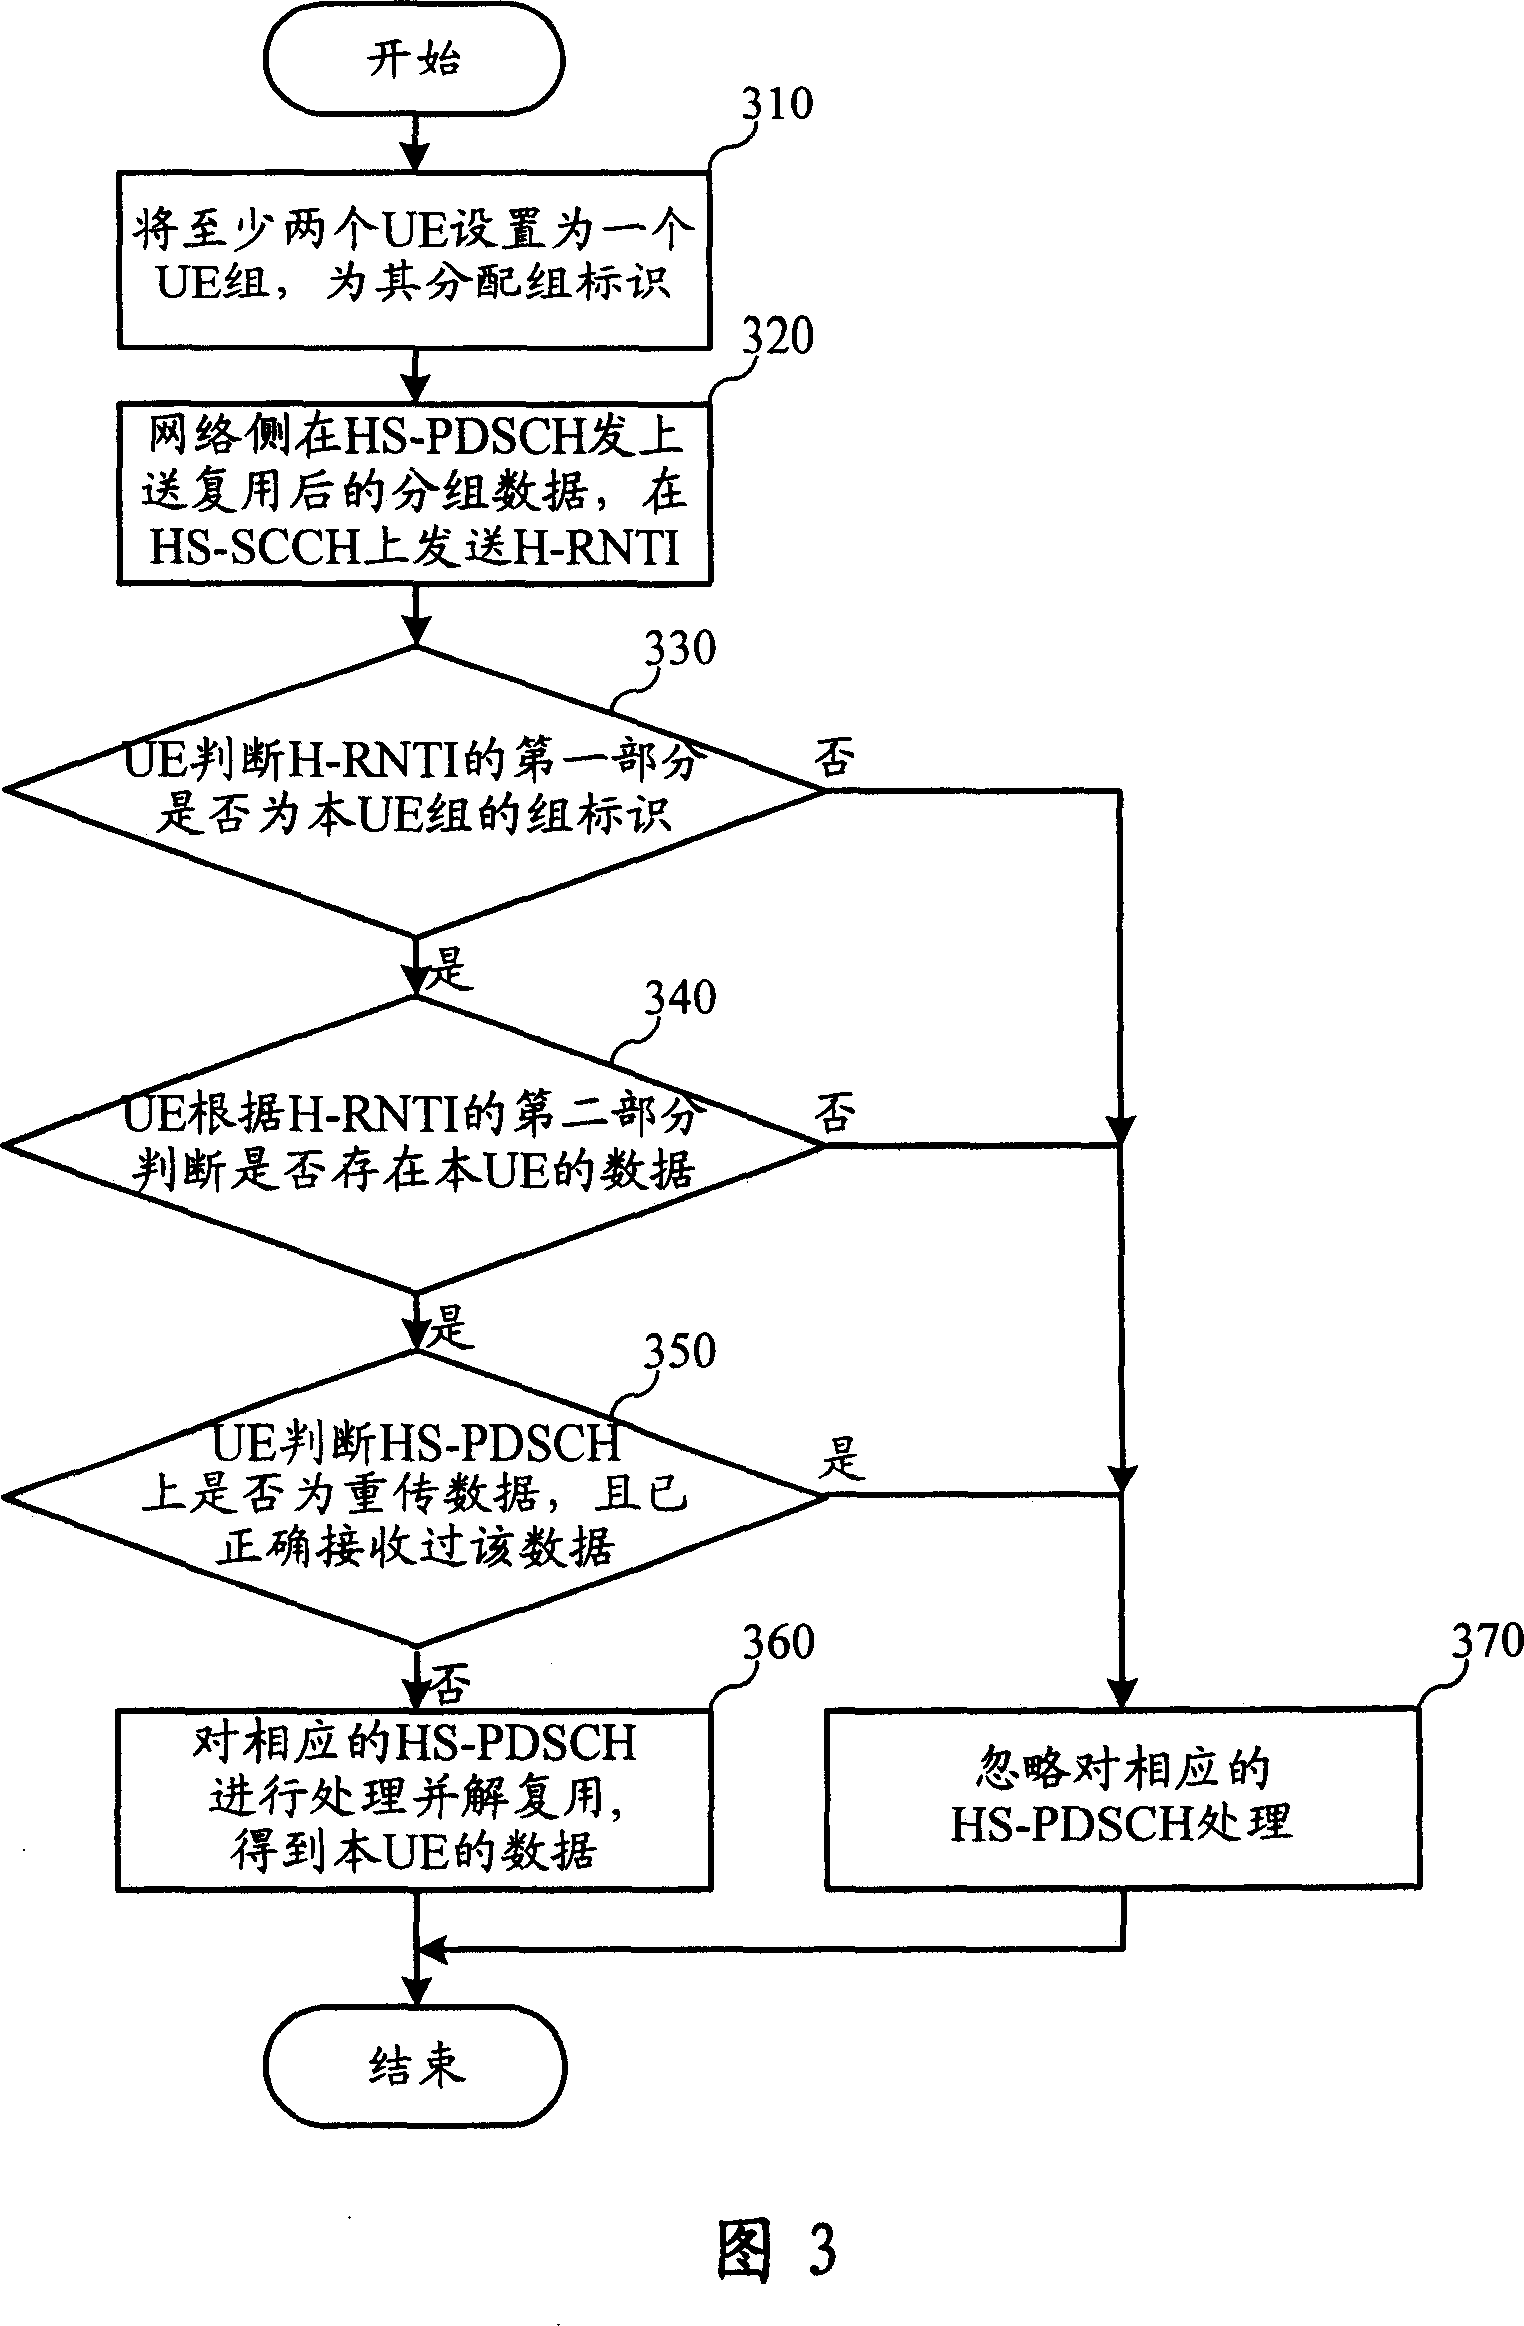 Data multiplexing method of multi-user device for the mobile communication network and its system